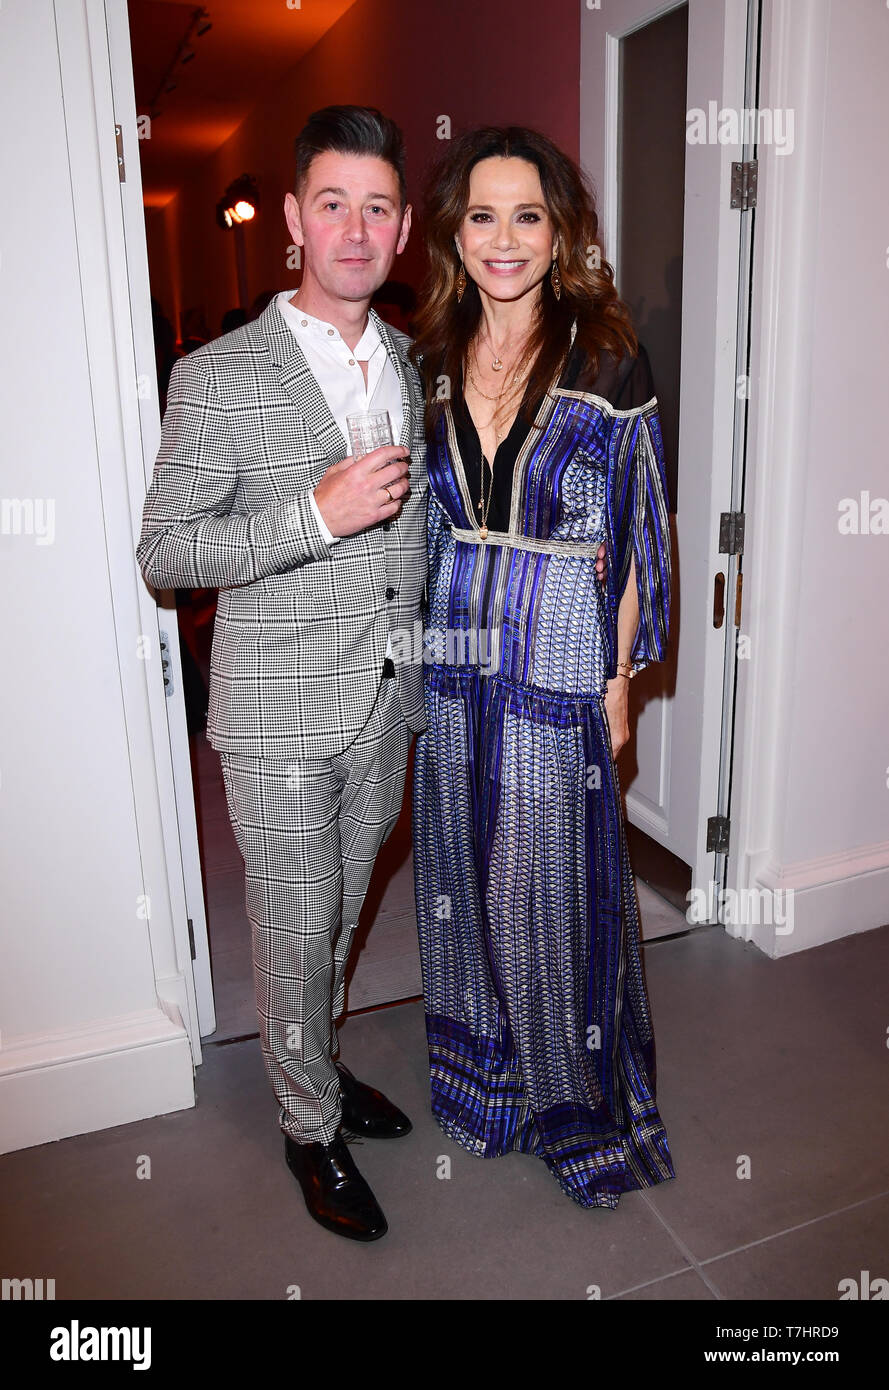 Lena Olin (right) attending the season two of Riviera Premiere hosted at Saatchi Gallery on 7 May - Series 2 airs on Sky Atlantic and NOW TV 23 May - in London. Stock Photo